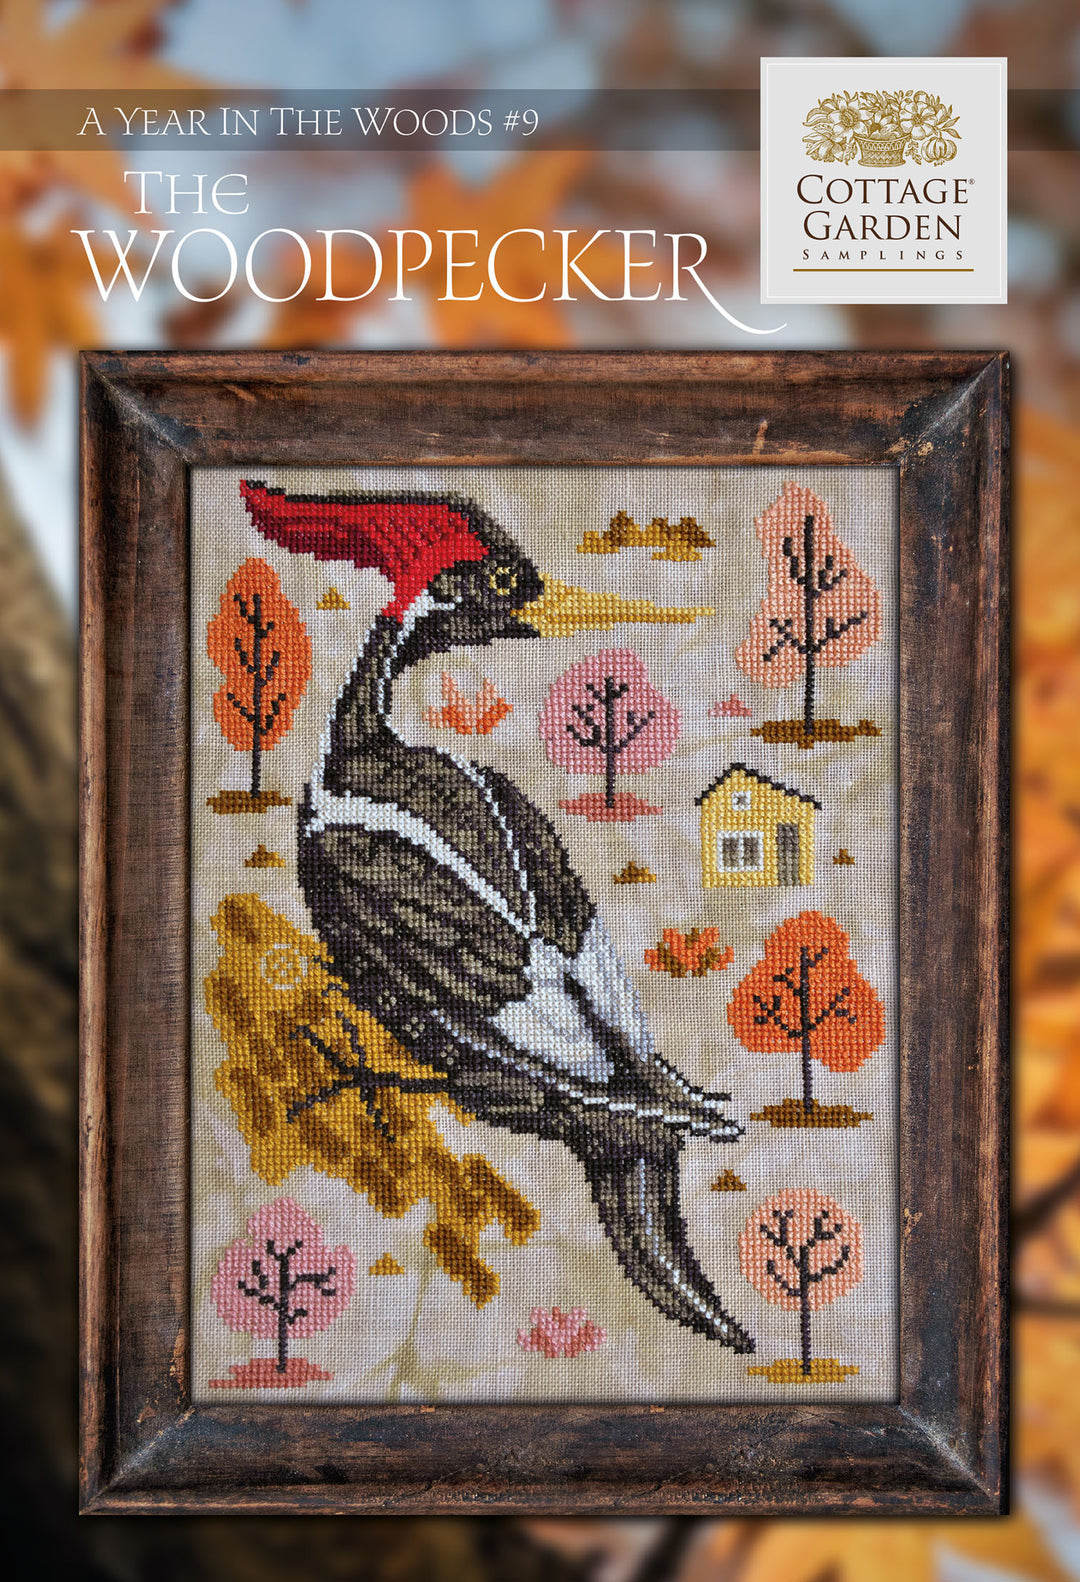 The Woodpecker, A Year in the Woods #9 | Cottage Garden Samplings